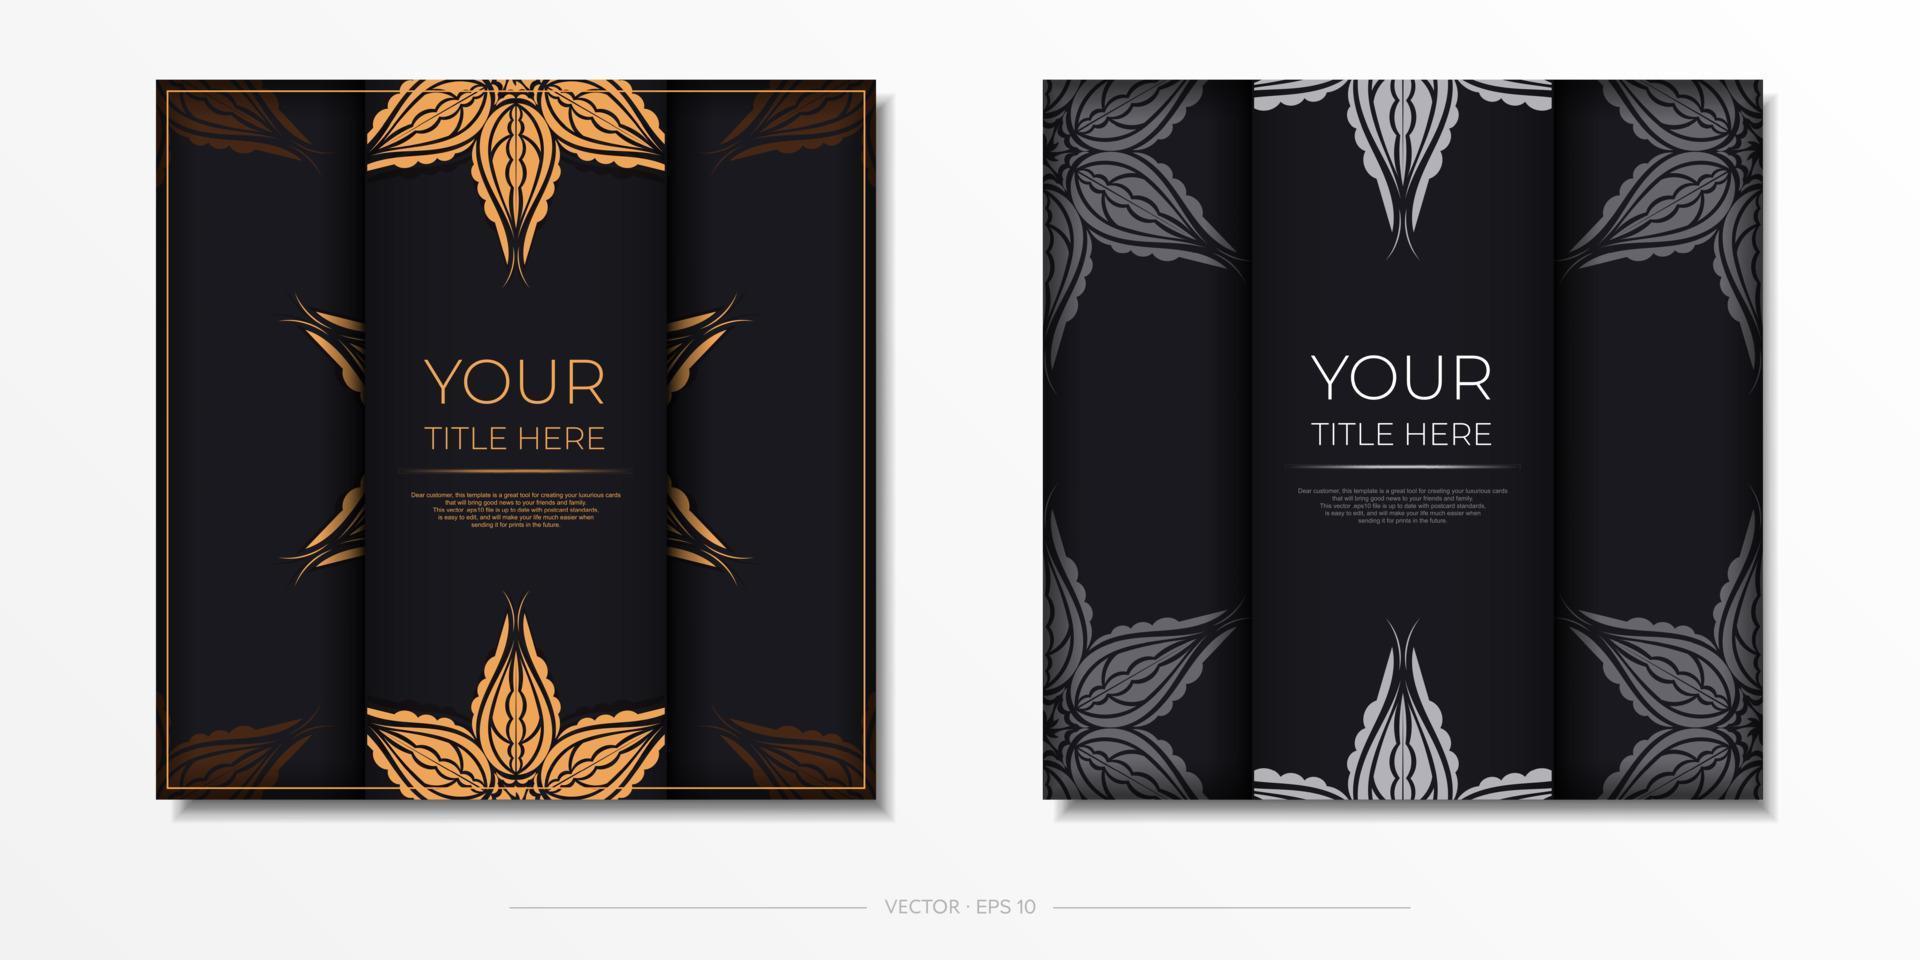 Luxurious black postcard template with vintage Indian mandala ornament. Elegant and classic vector elements ready for print and typography.